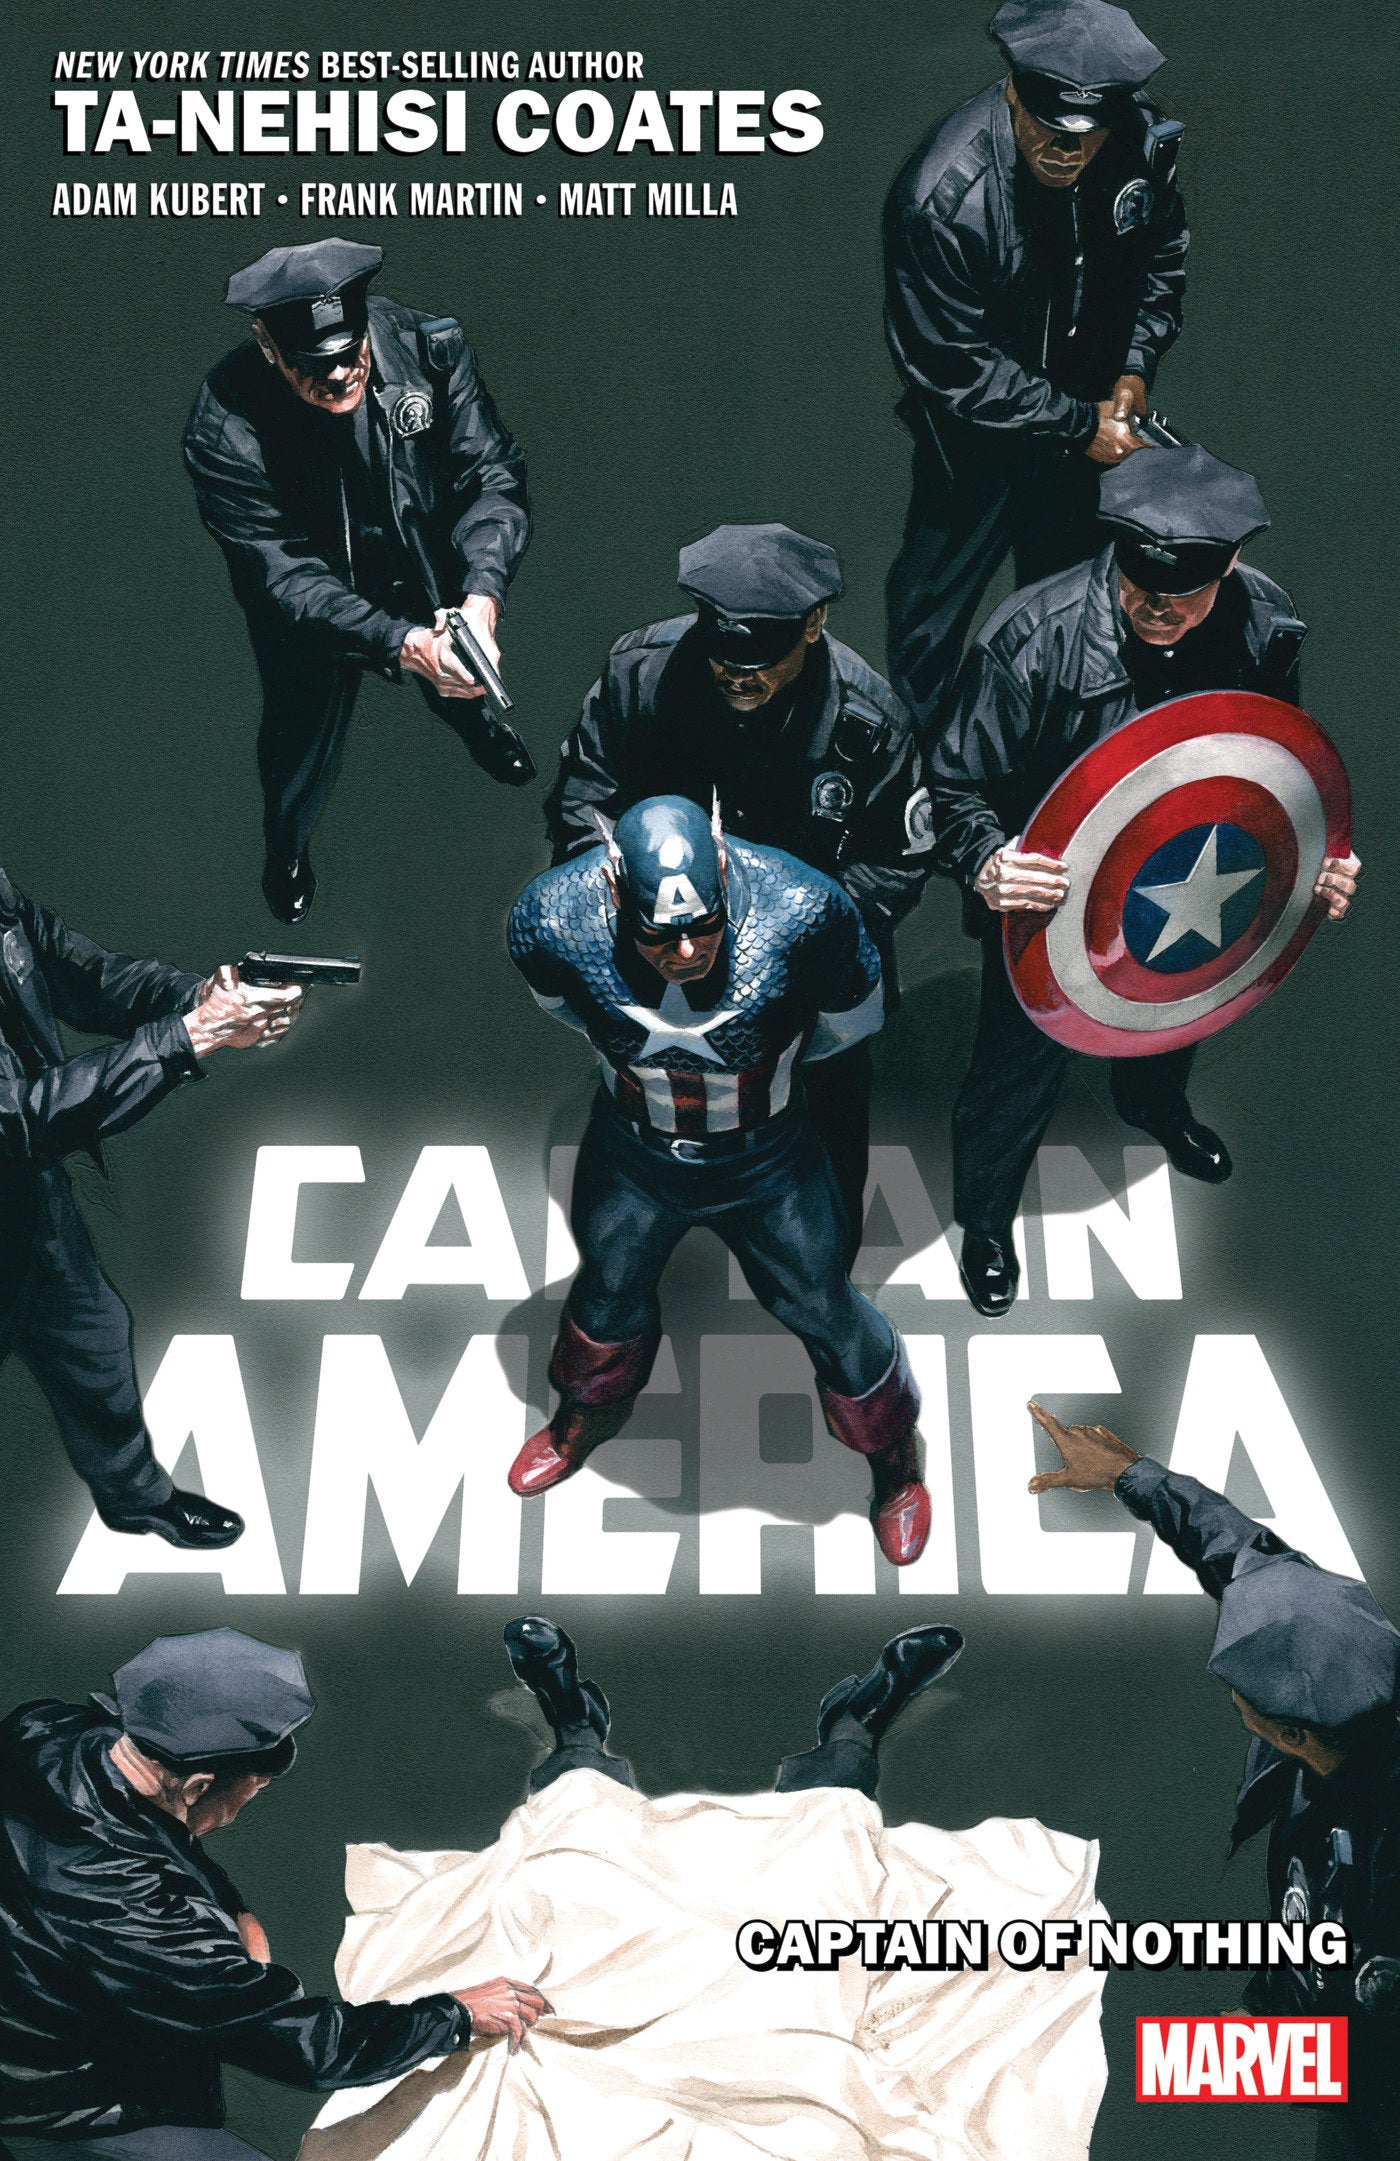 CAPTAIN AMERICA BY TA-NEHISI COATES VOL. 2: CAPTAIN OF NOTHING TRADE PAPERBACK